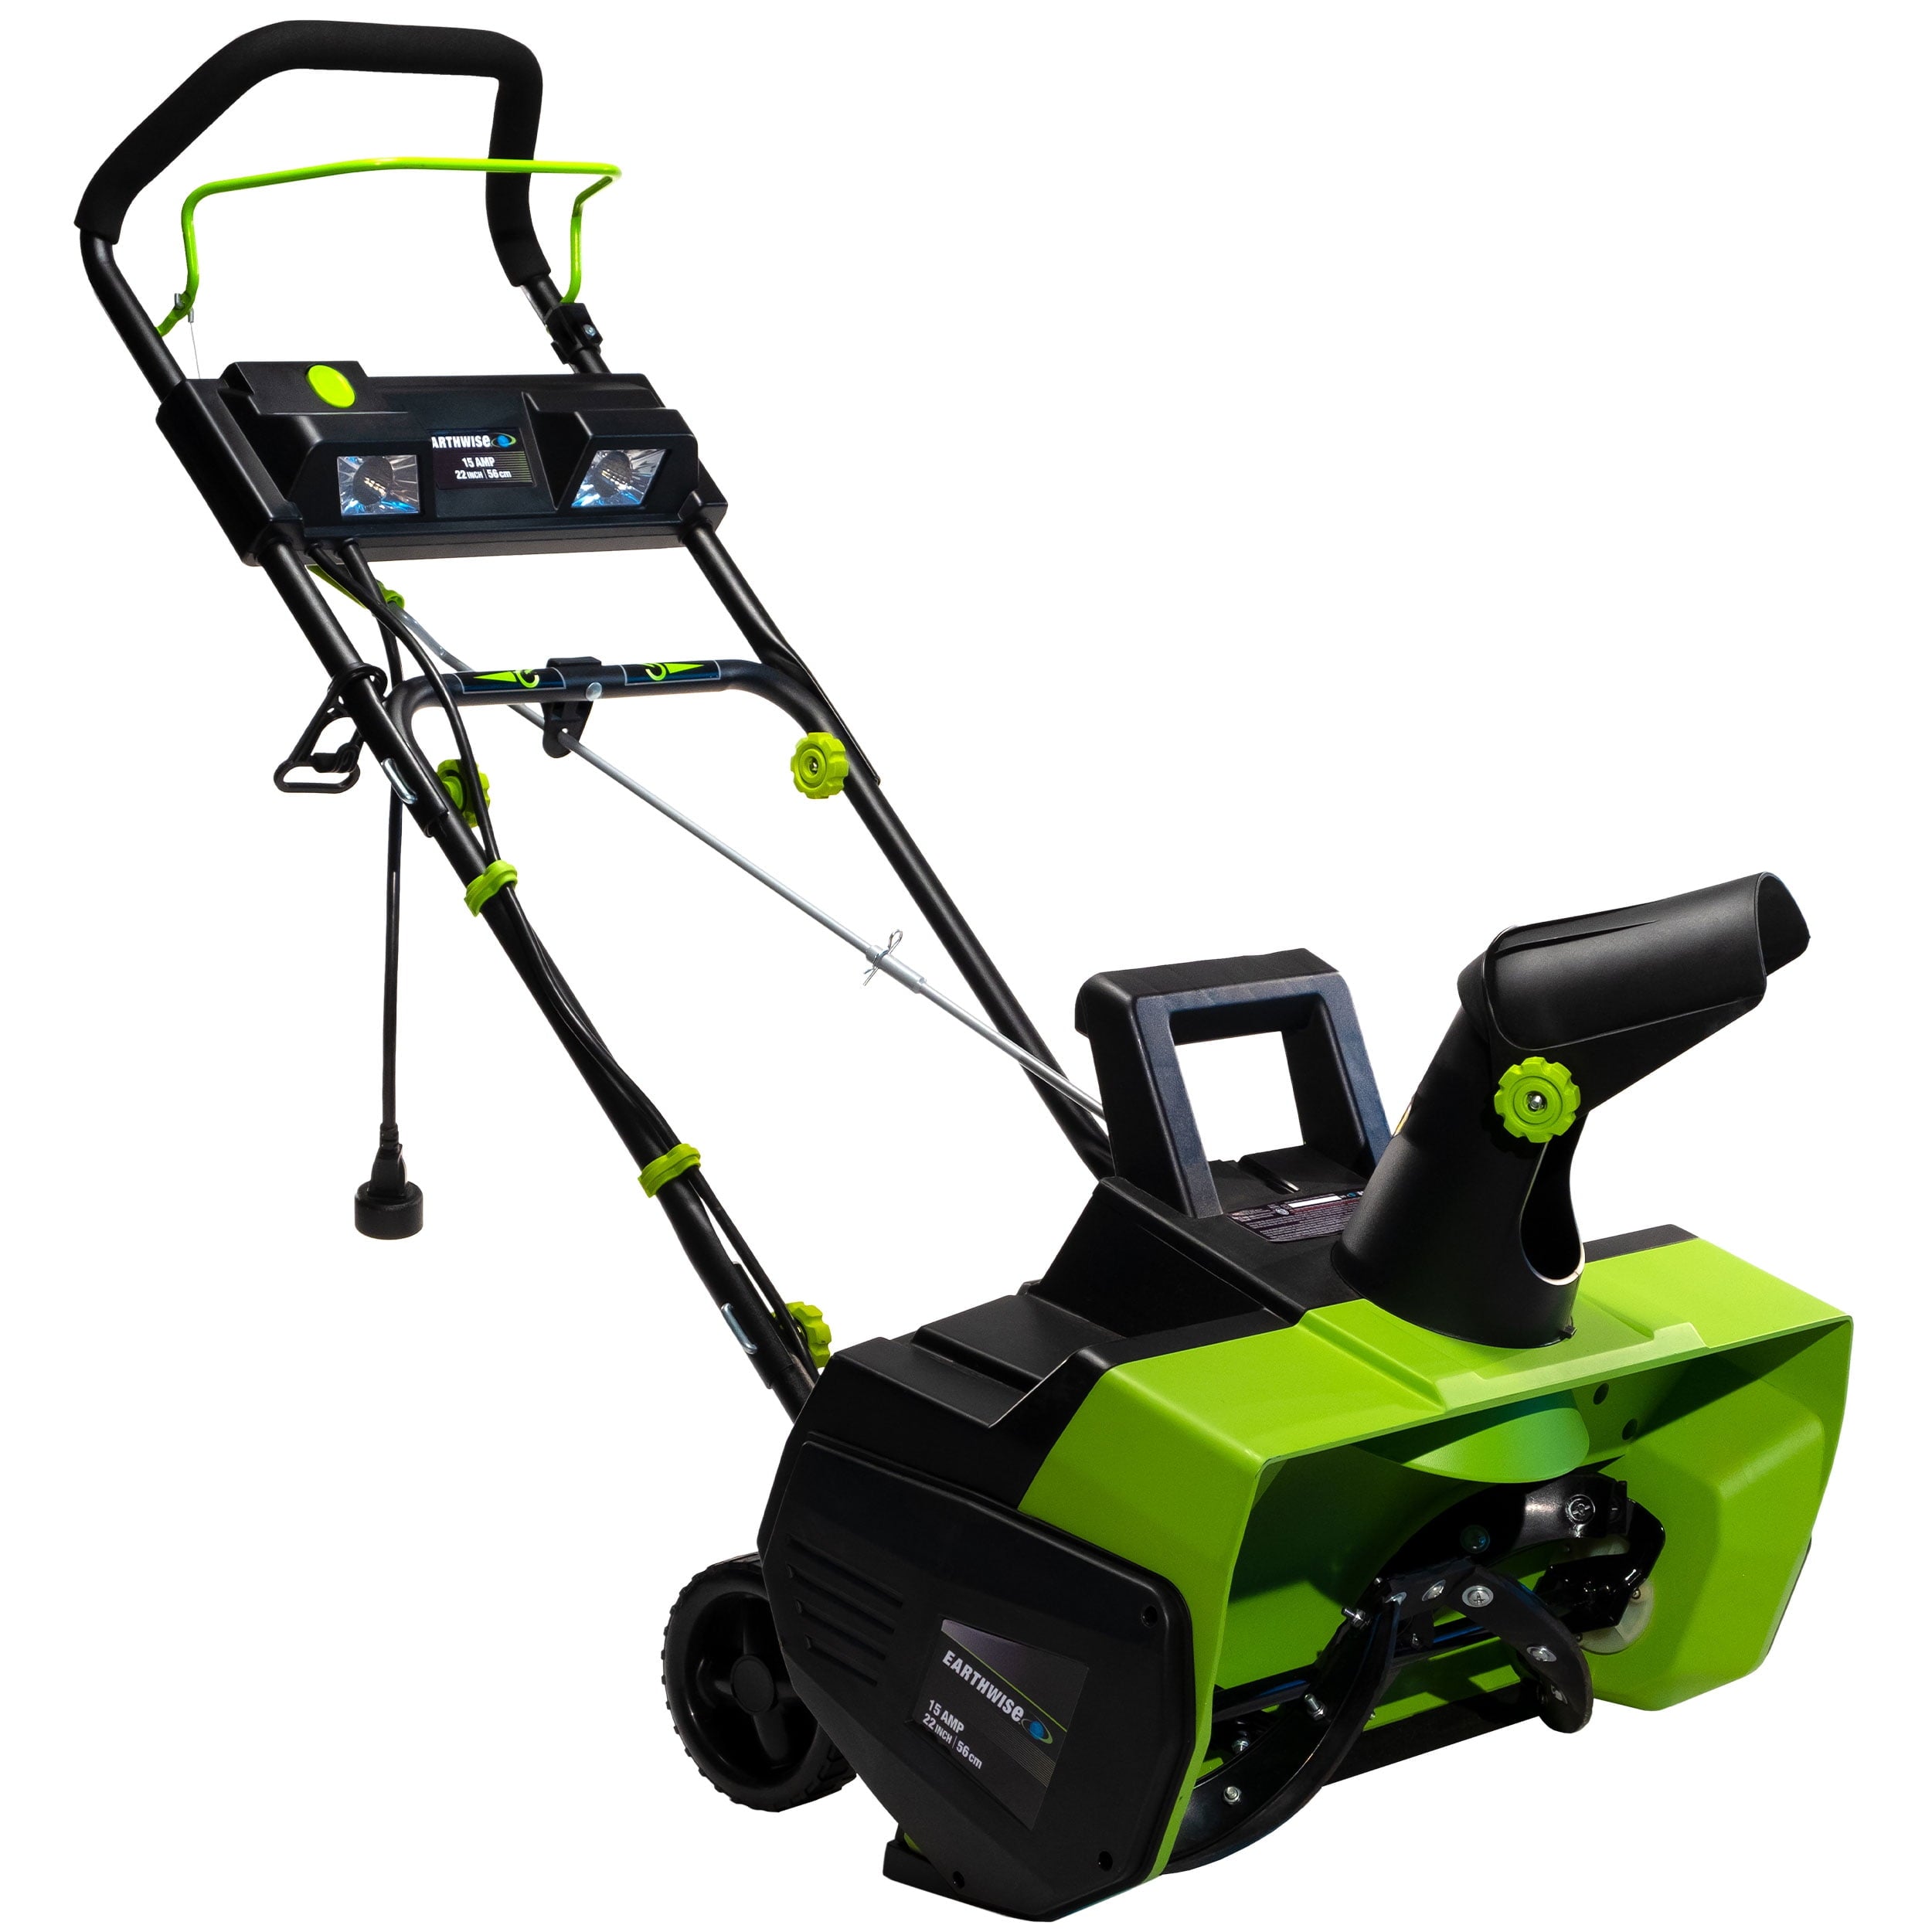 Earthwise 15-Amp 22-Inch Electric Corded Snow Thrower with LED Lights - 22 Inch